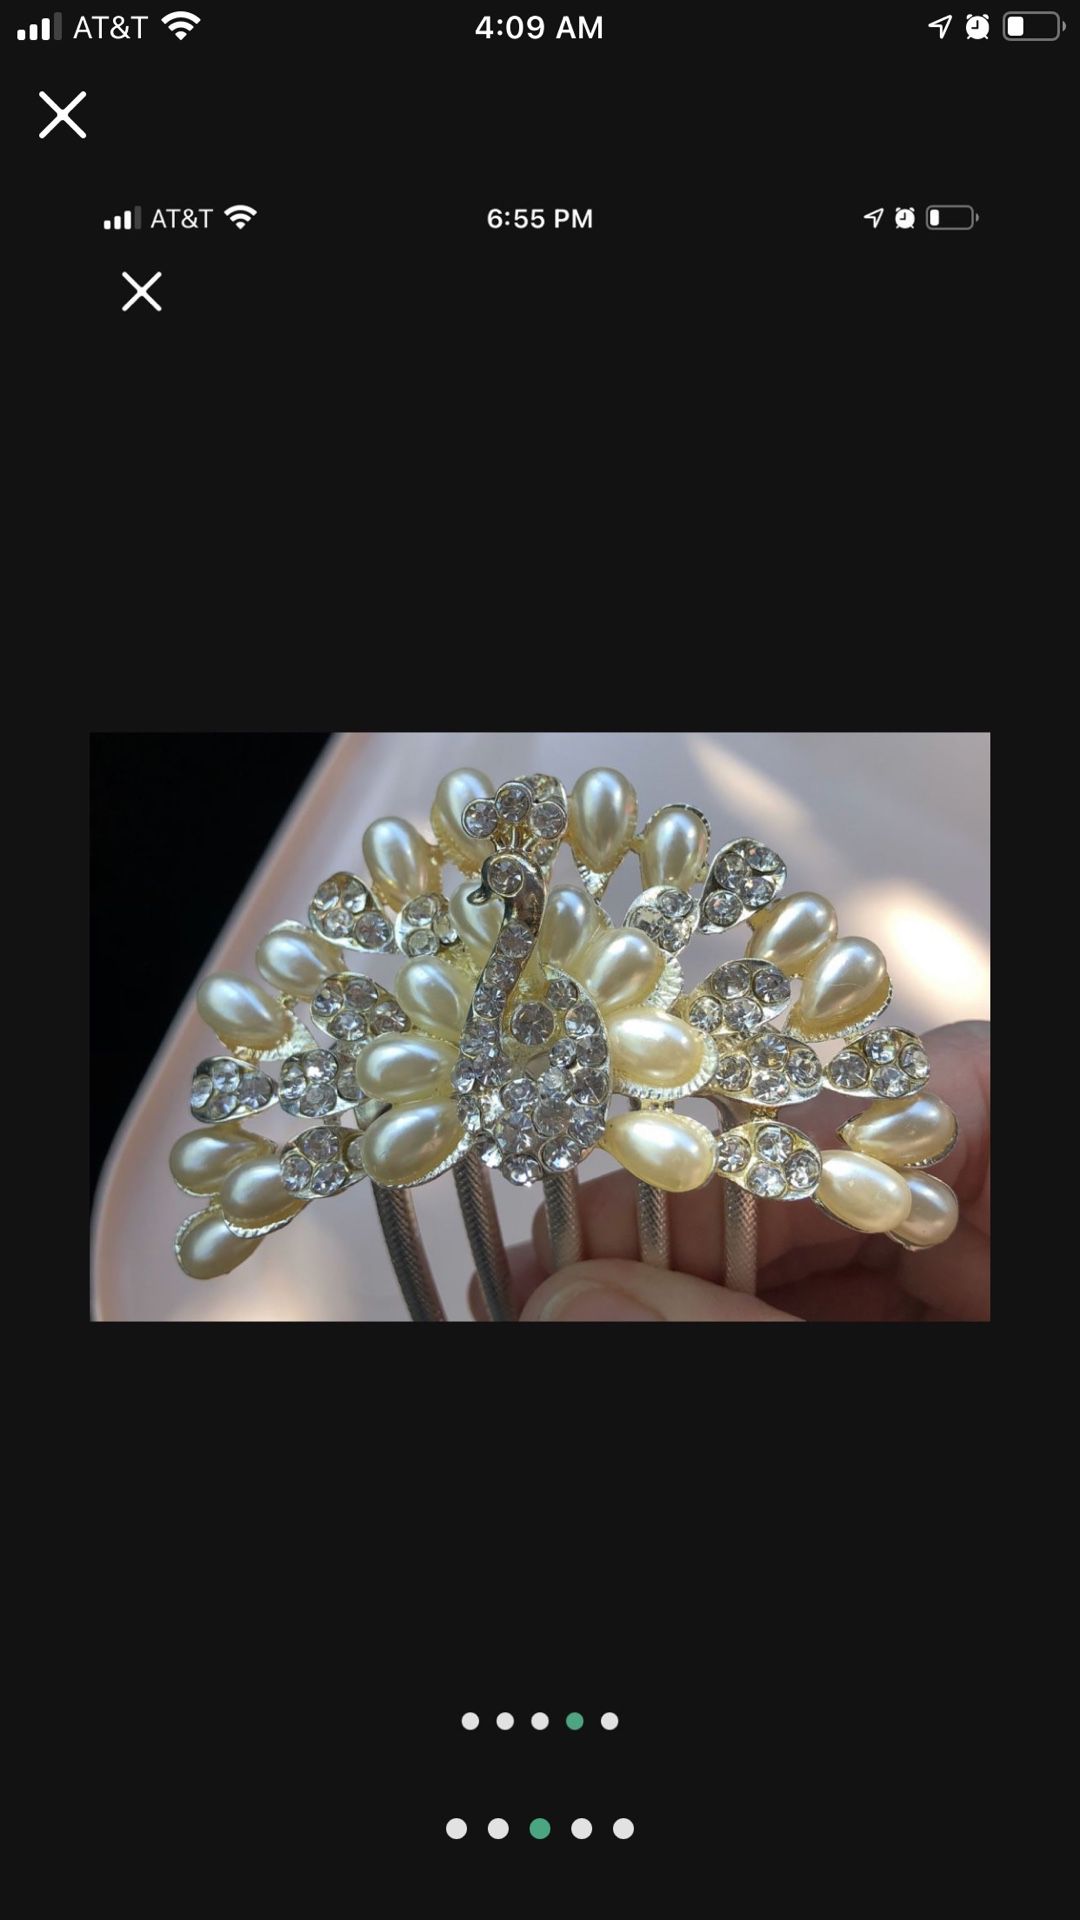 3 Inch Wide Ornate Hair Comb Faux Pearls Rhinestones Silver Tone Peacock Lovely Wedding Updo 